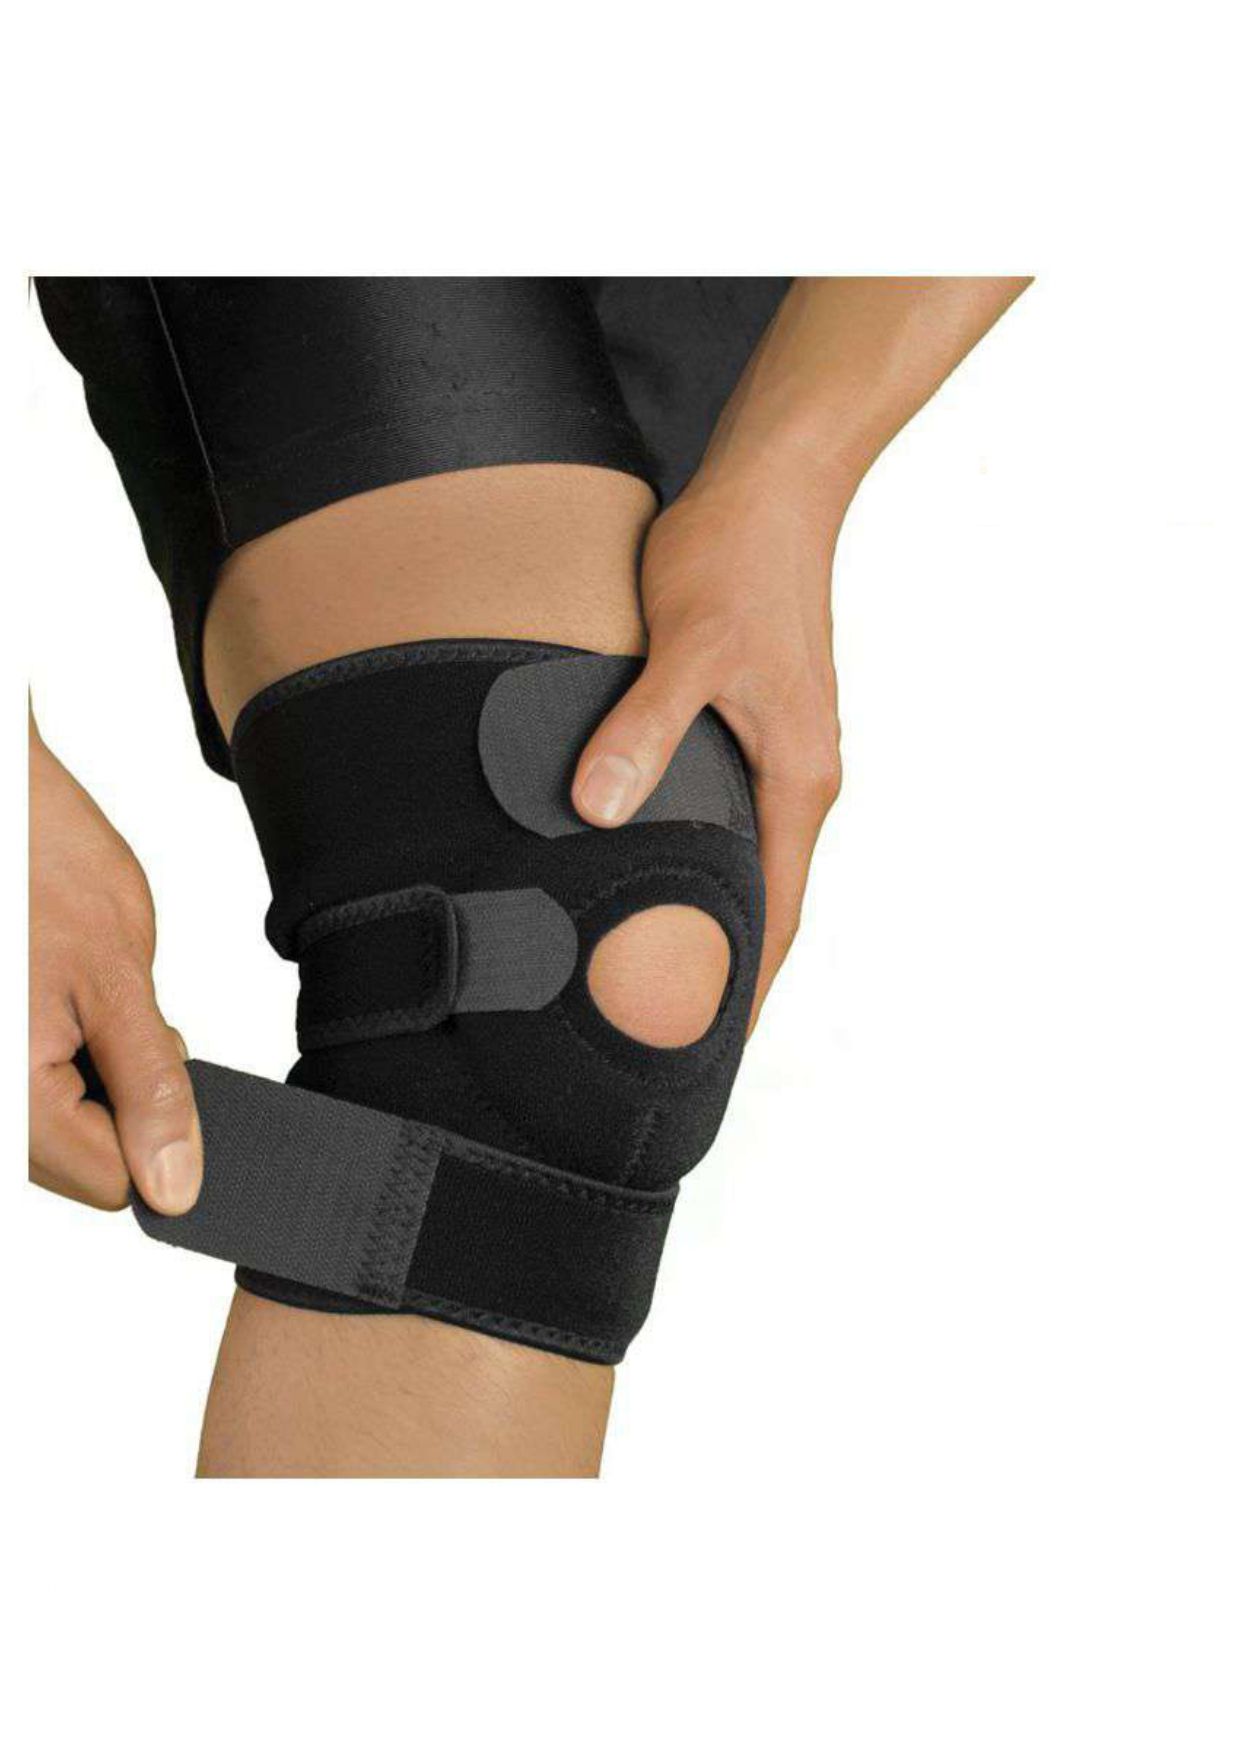     			Aheadstrong Adjustable Knee Cap Support Brace for Sports | Gym | Running | and Protection for Men and Women(pair) (free size)